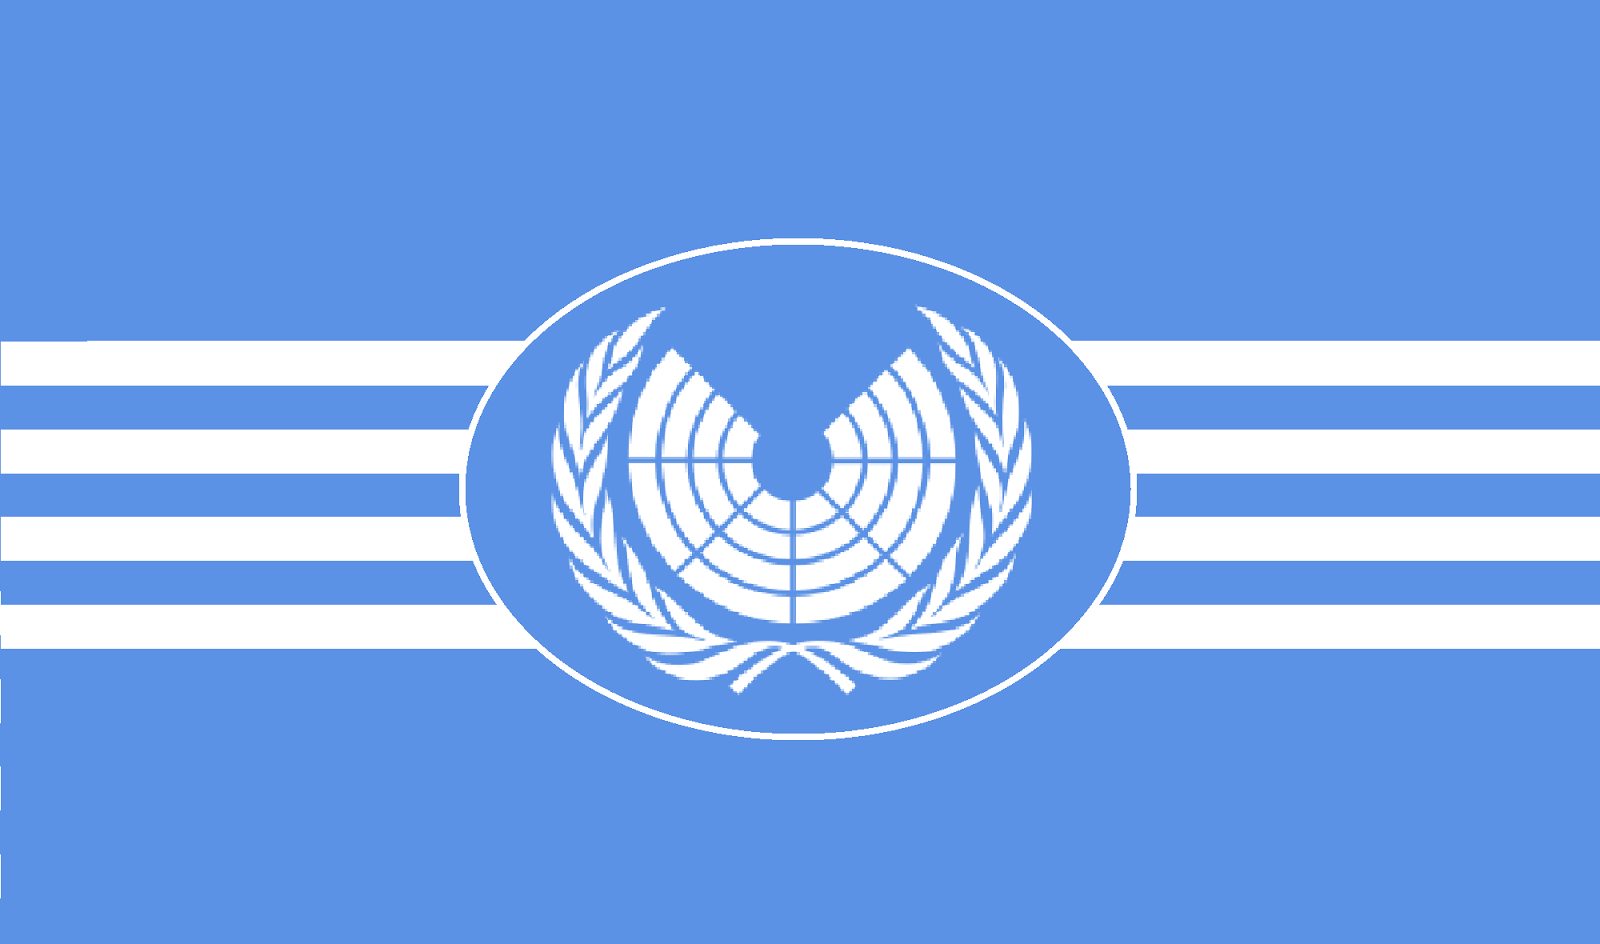 Sams Flags United Nations